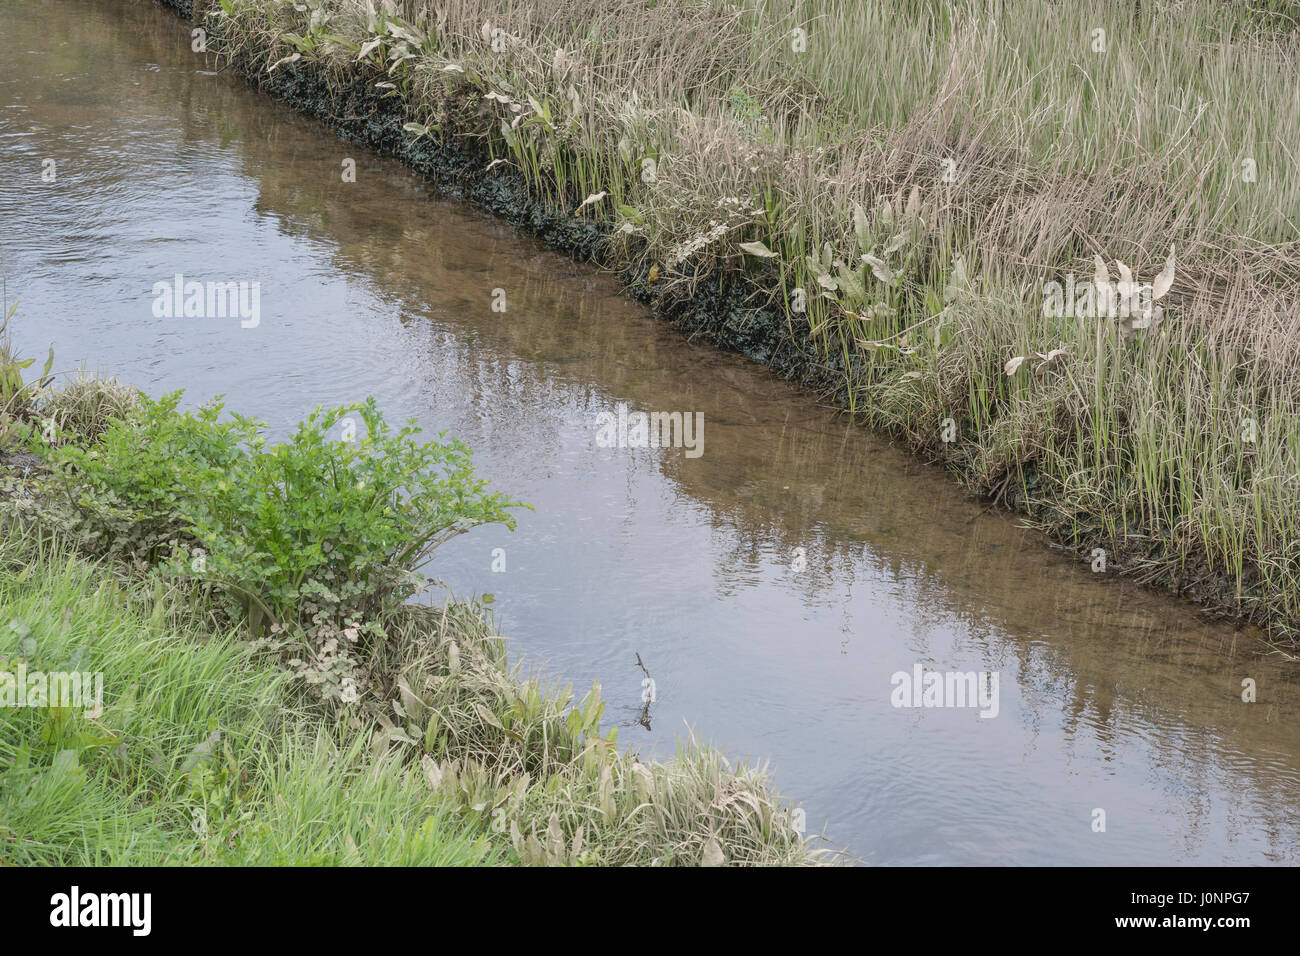 Clump of poisonous Hemlock Water-Dropwort / Oenanthe crocata seen beside a tidal drainage channel. For water market, water as commodity. Stock Photo